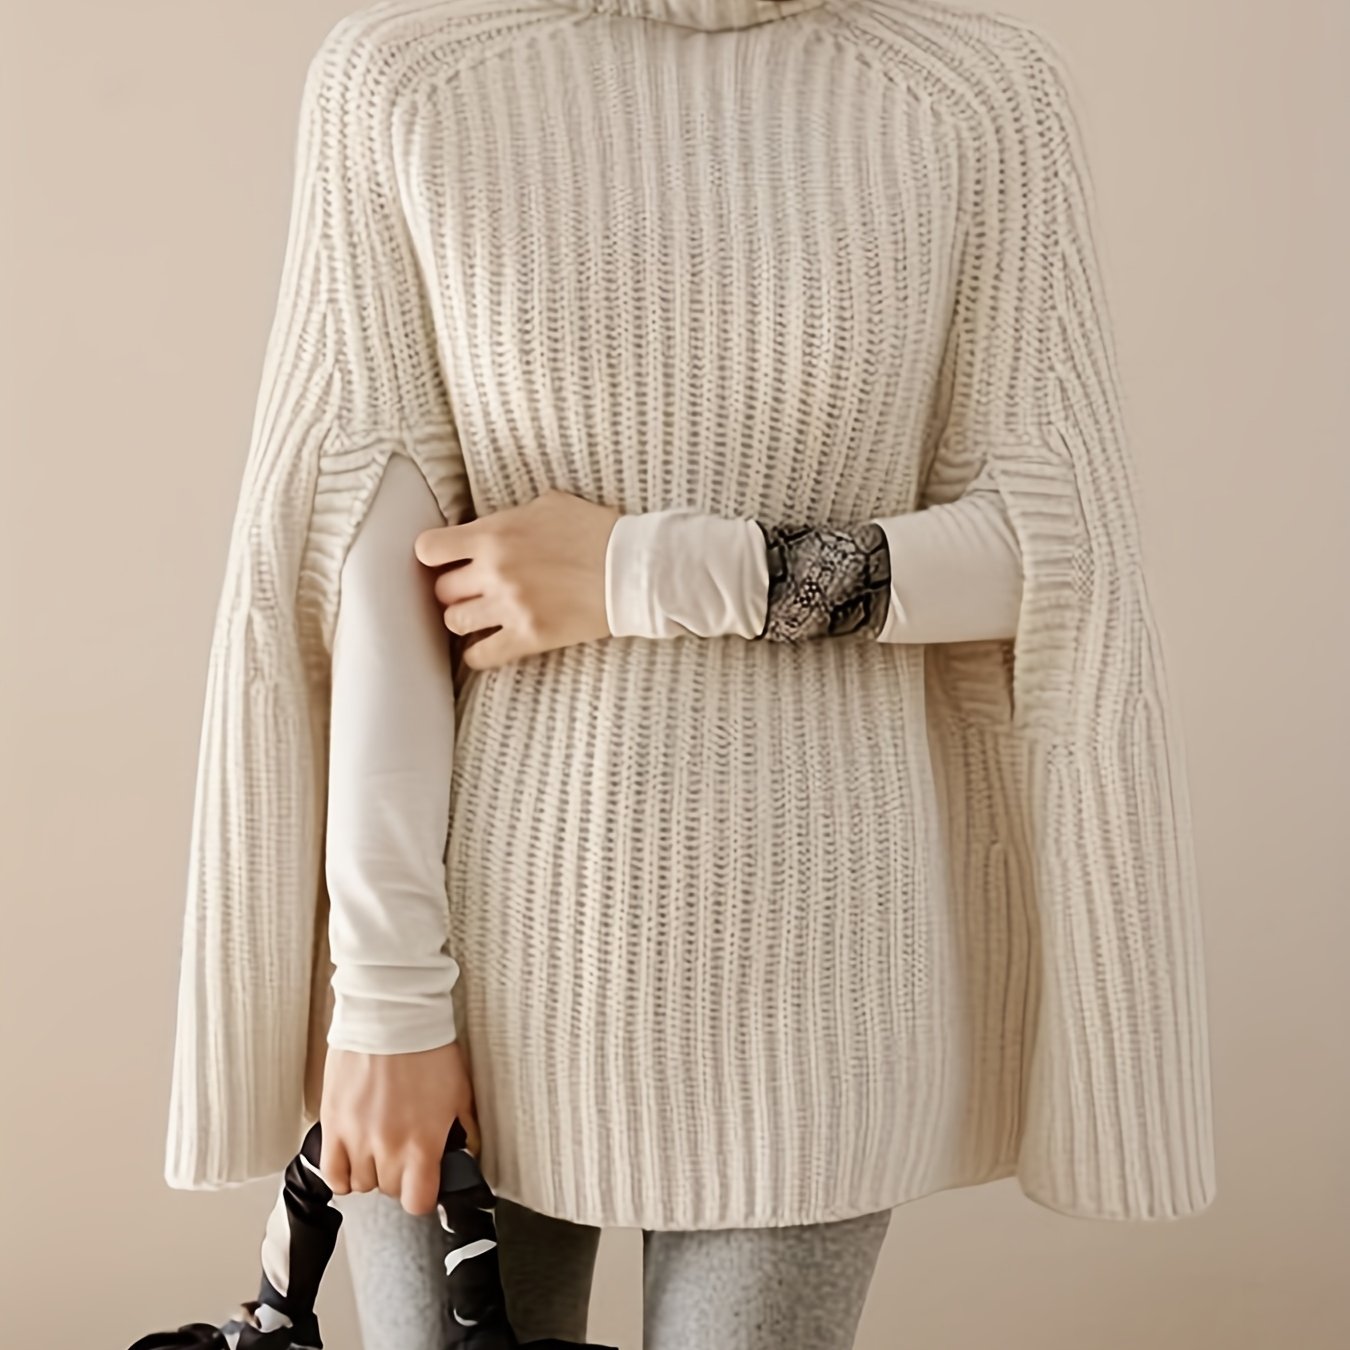 Antmvs Cape Sleeve Turtle Neck Sweater, Elegant Ribbed Knit Sweater For Fall & Winter, Women's Clothing